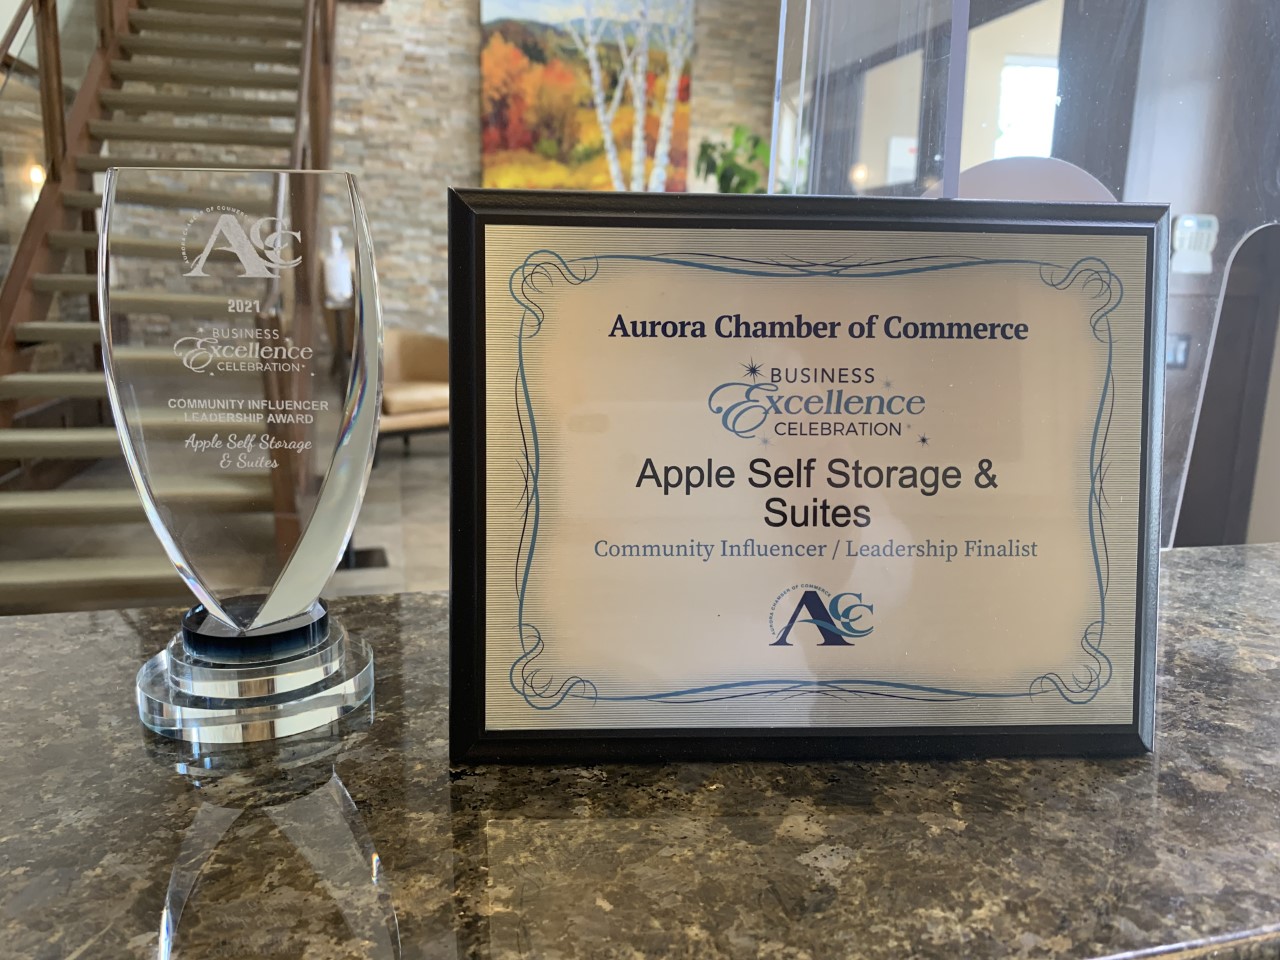 Apple Self Storage and Suites Receives Business Excellence Award